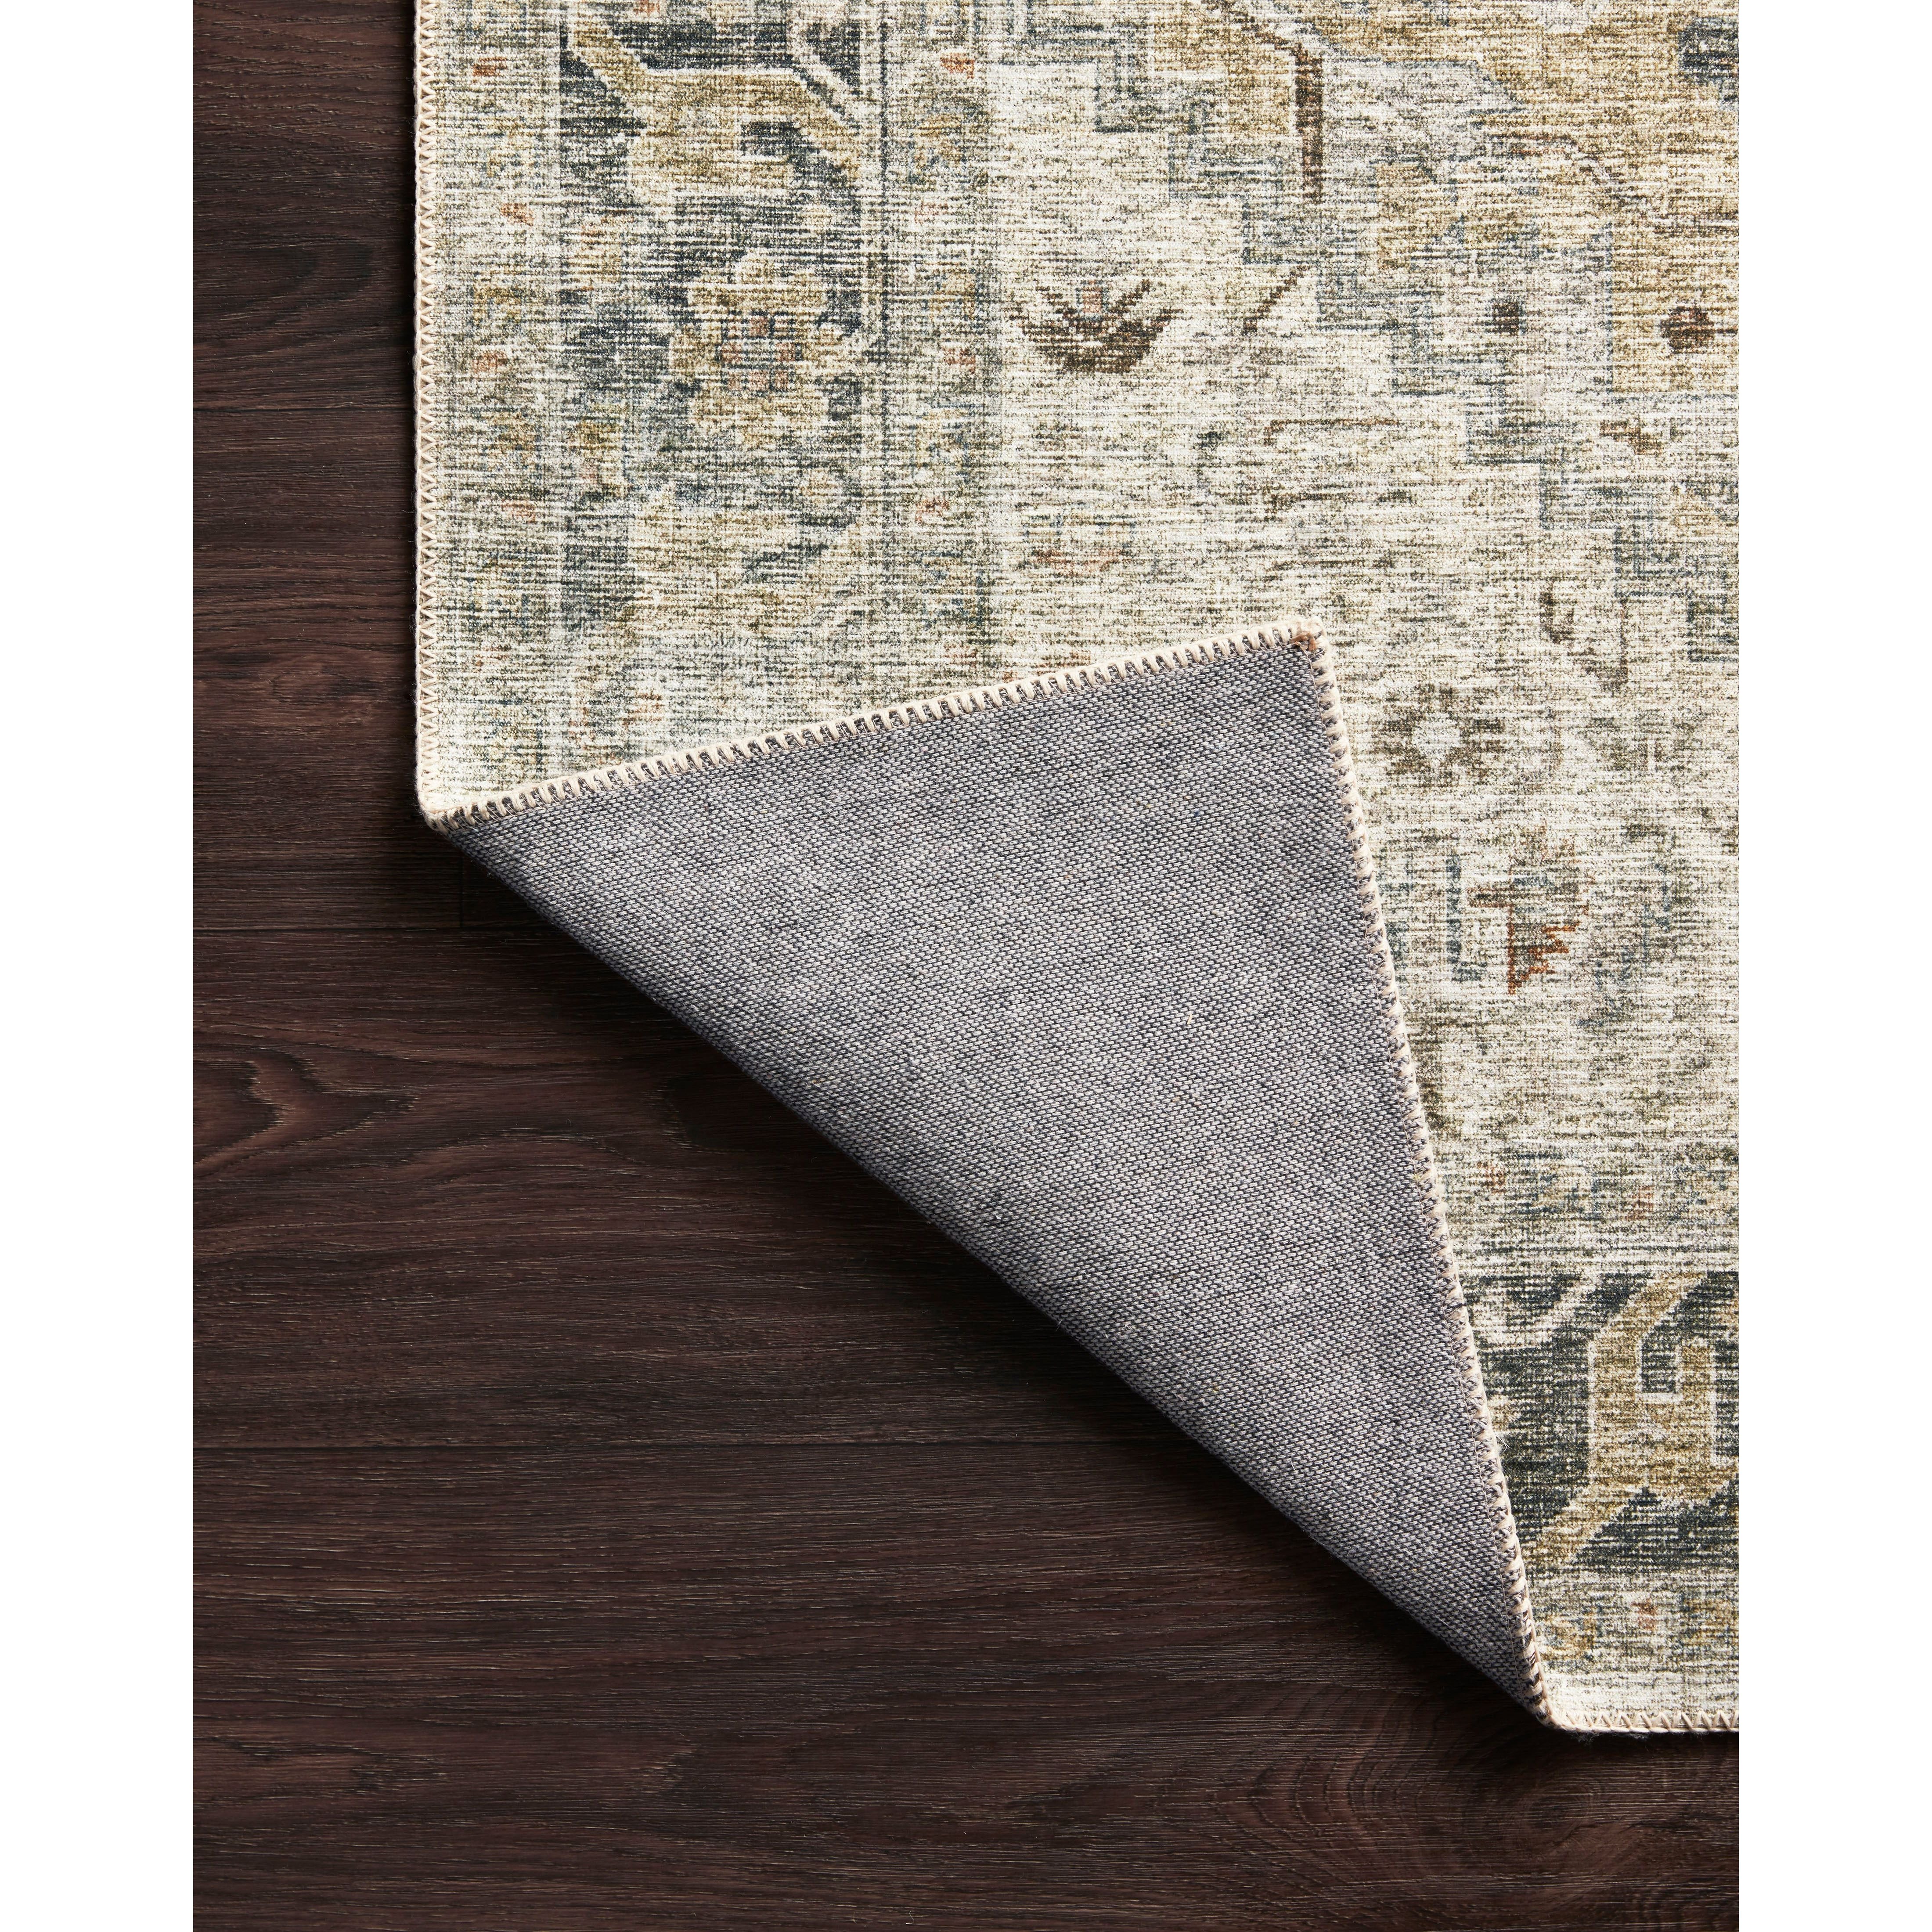 The Skye Natural / Sand rug is timeless and classic with a beautiful, old-world design in a variety of color choices. Power-loomed of 100% polyester, these printed designs provide the textured effect of high-end rugs at an affordable price.